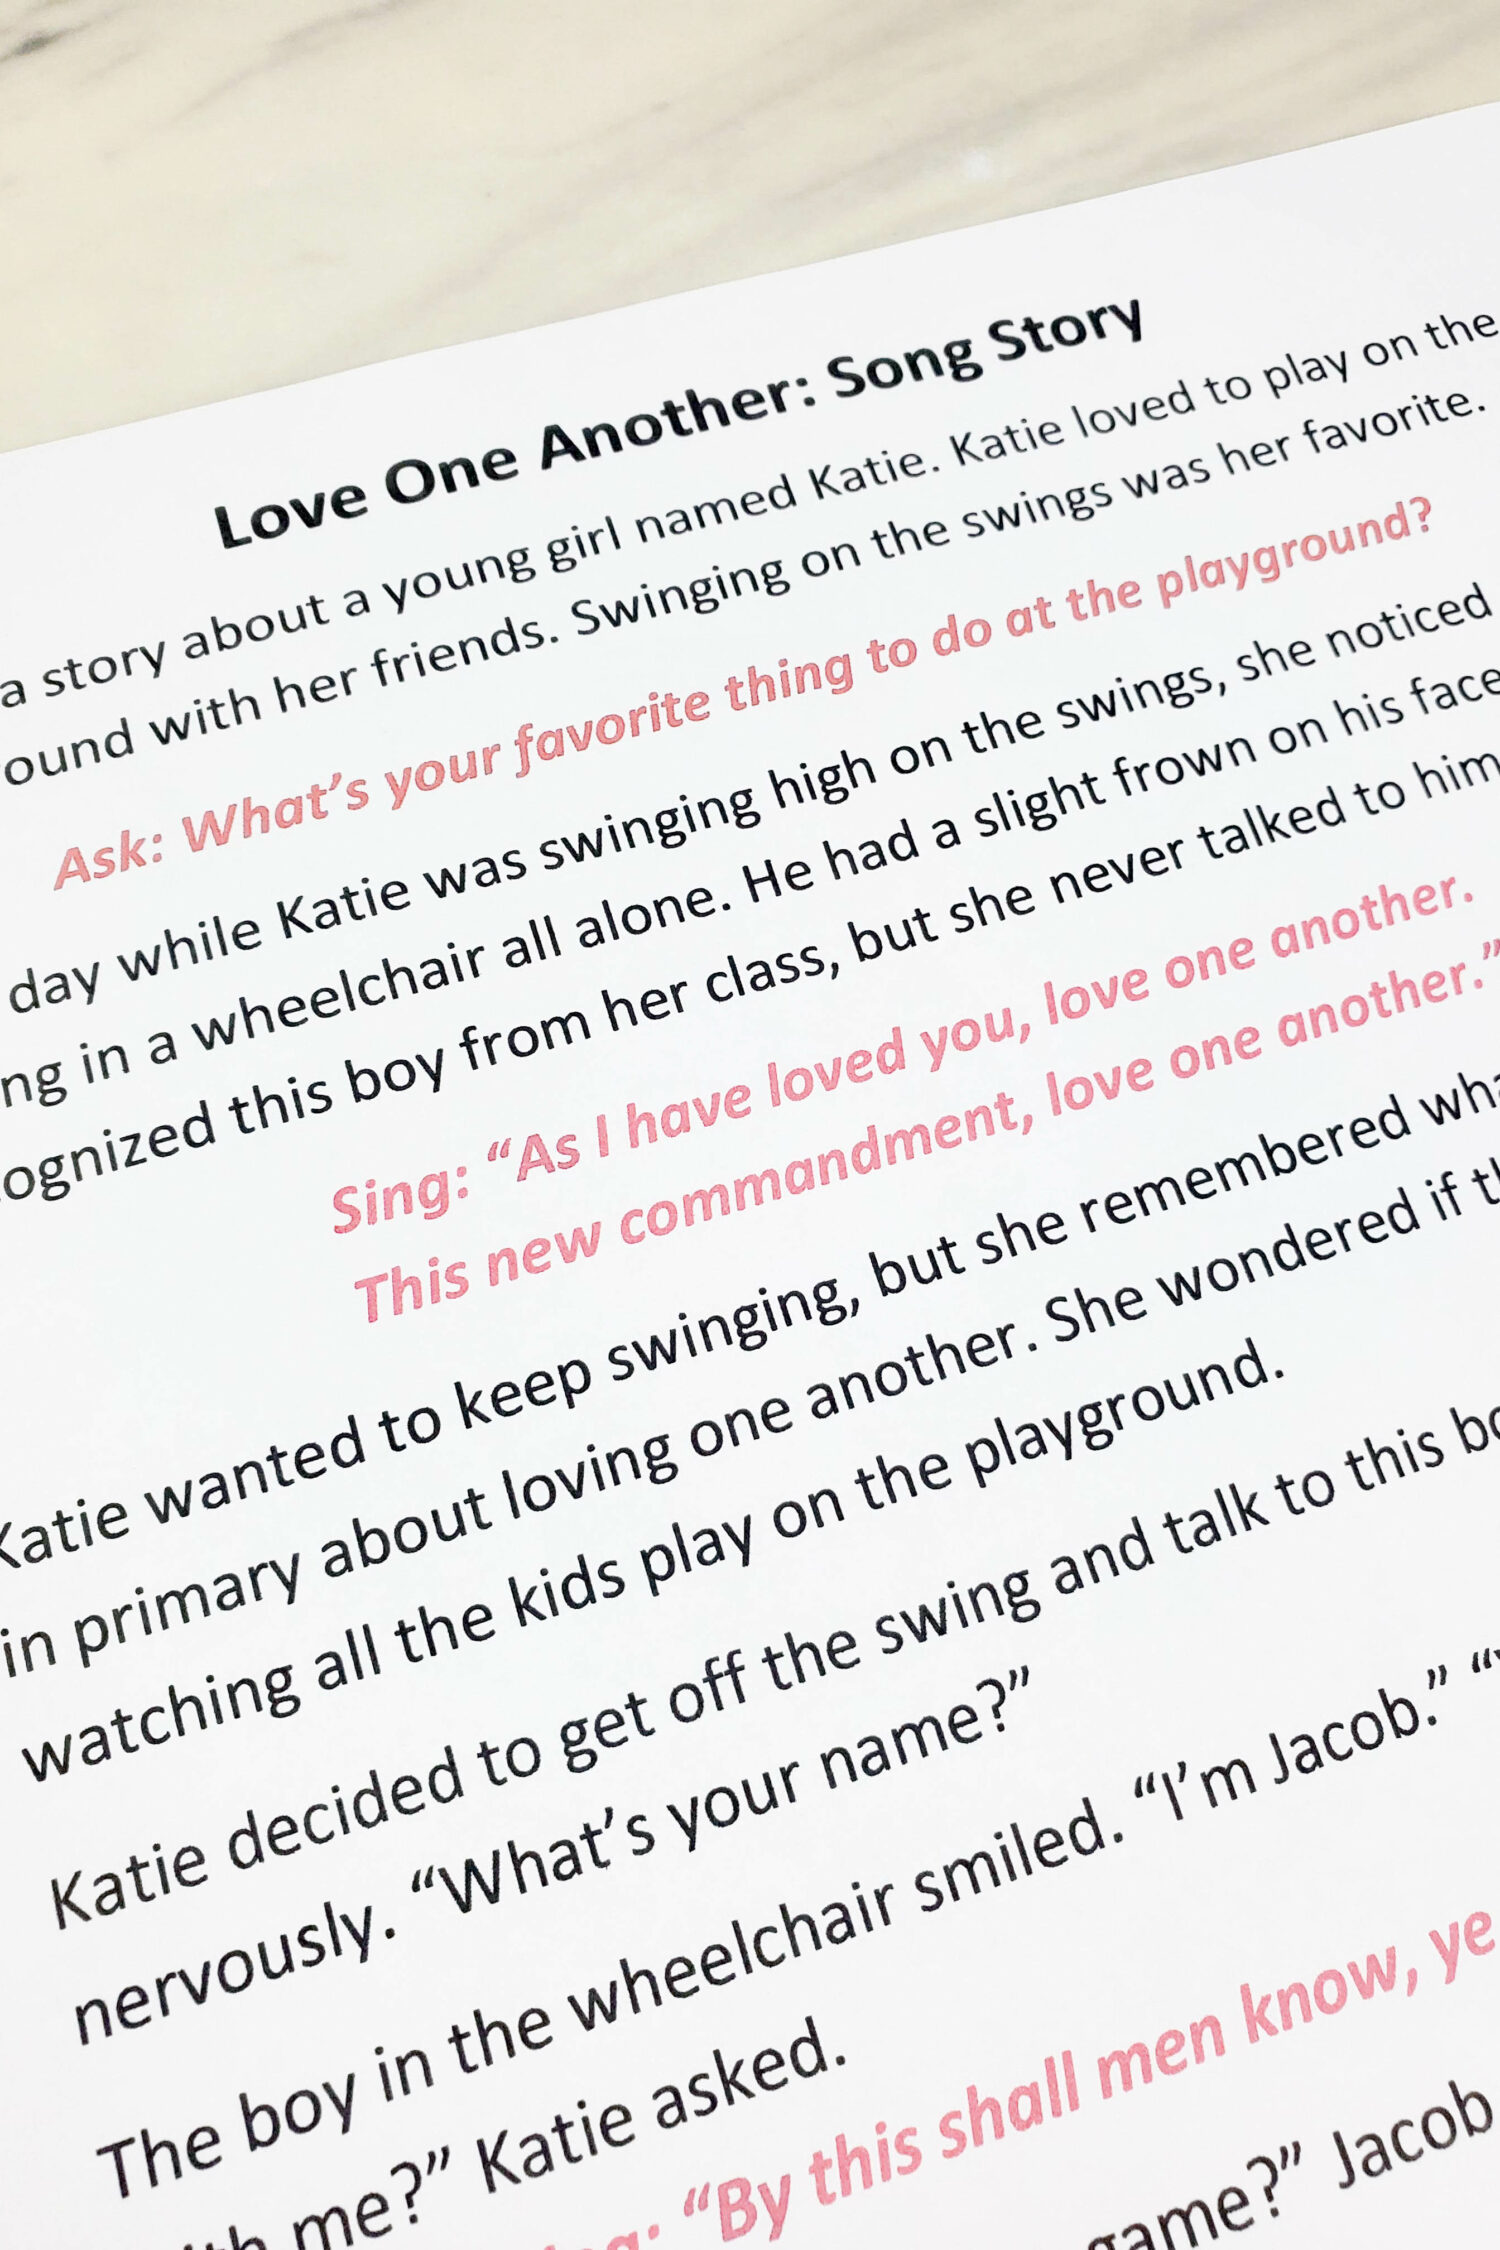 Up close Love One Another 1-page printable song story lesson plan for singing time